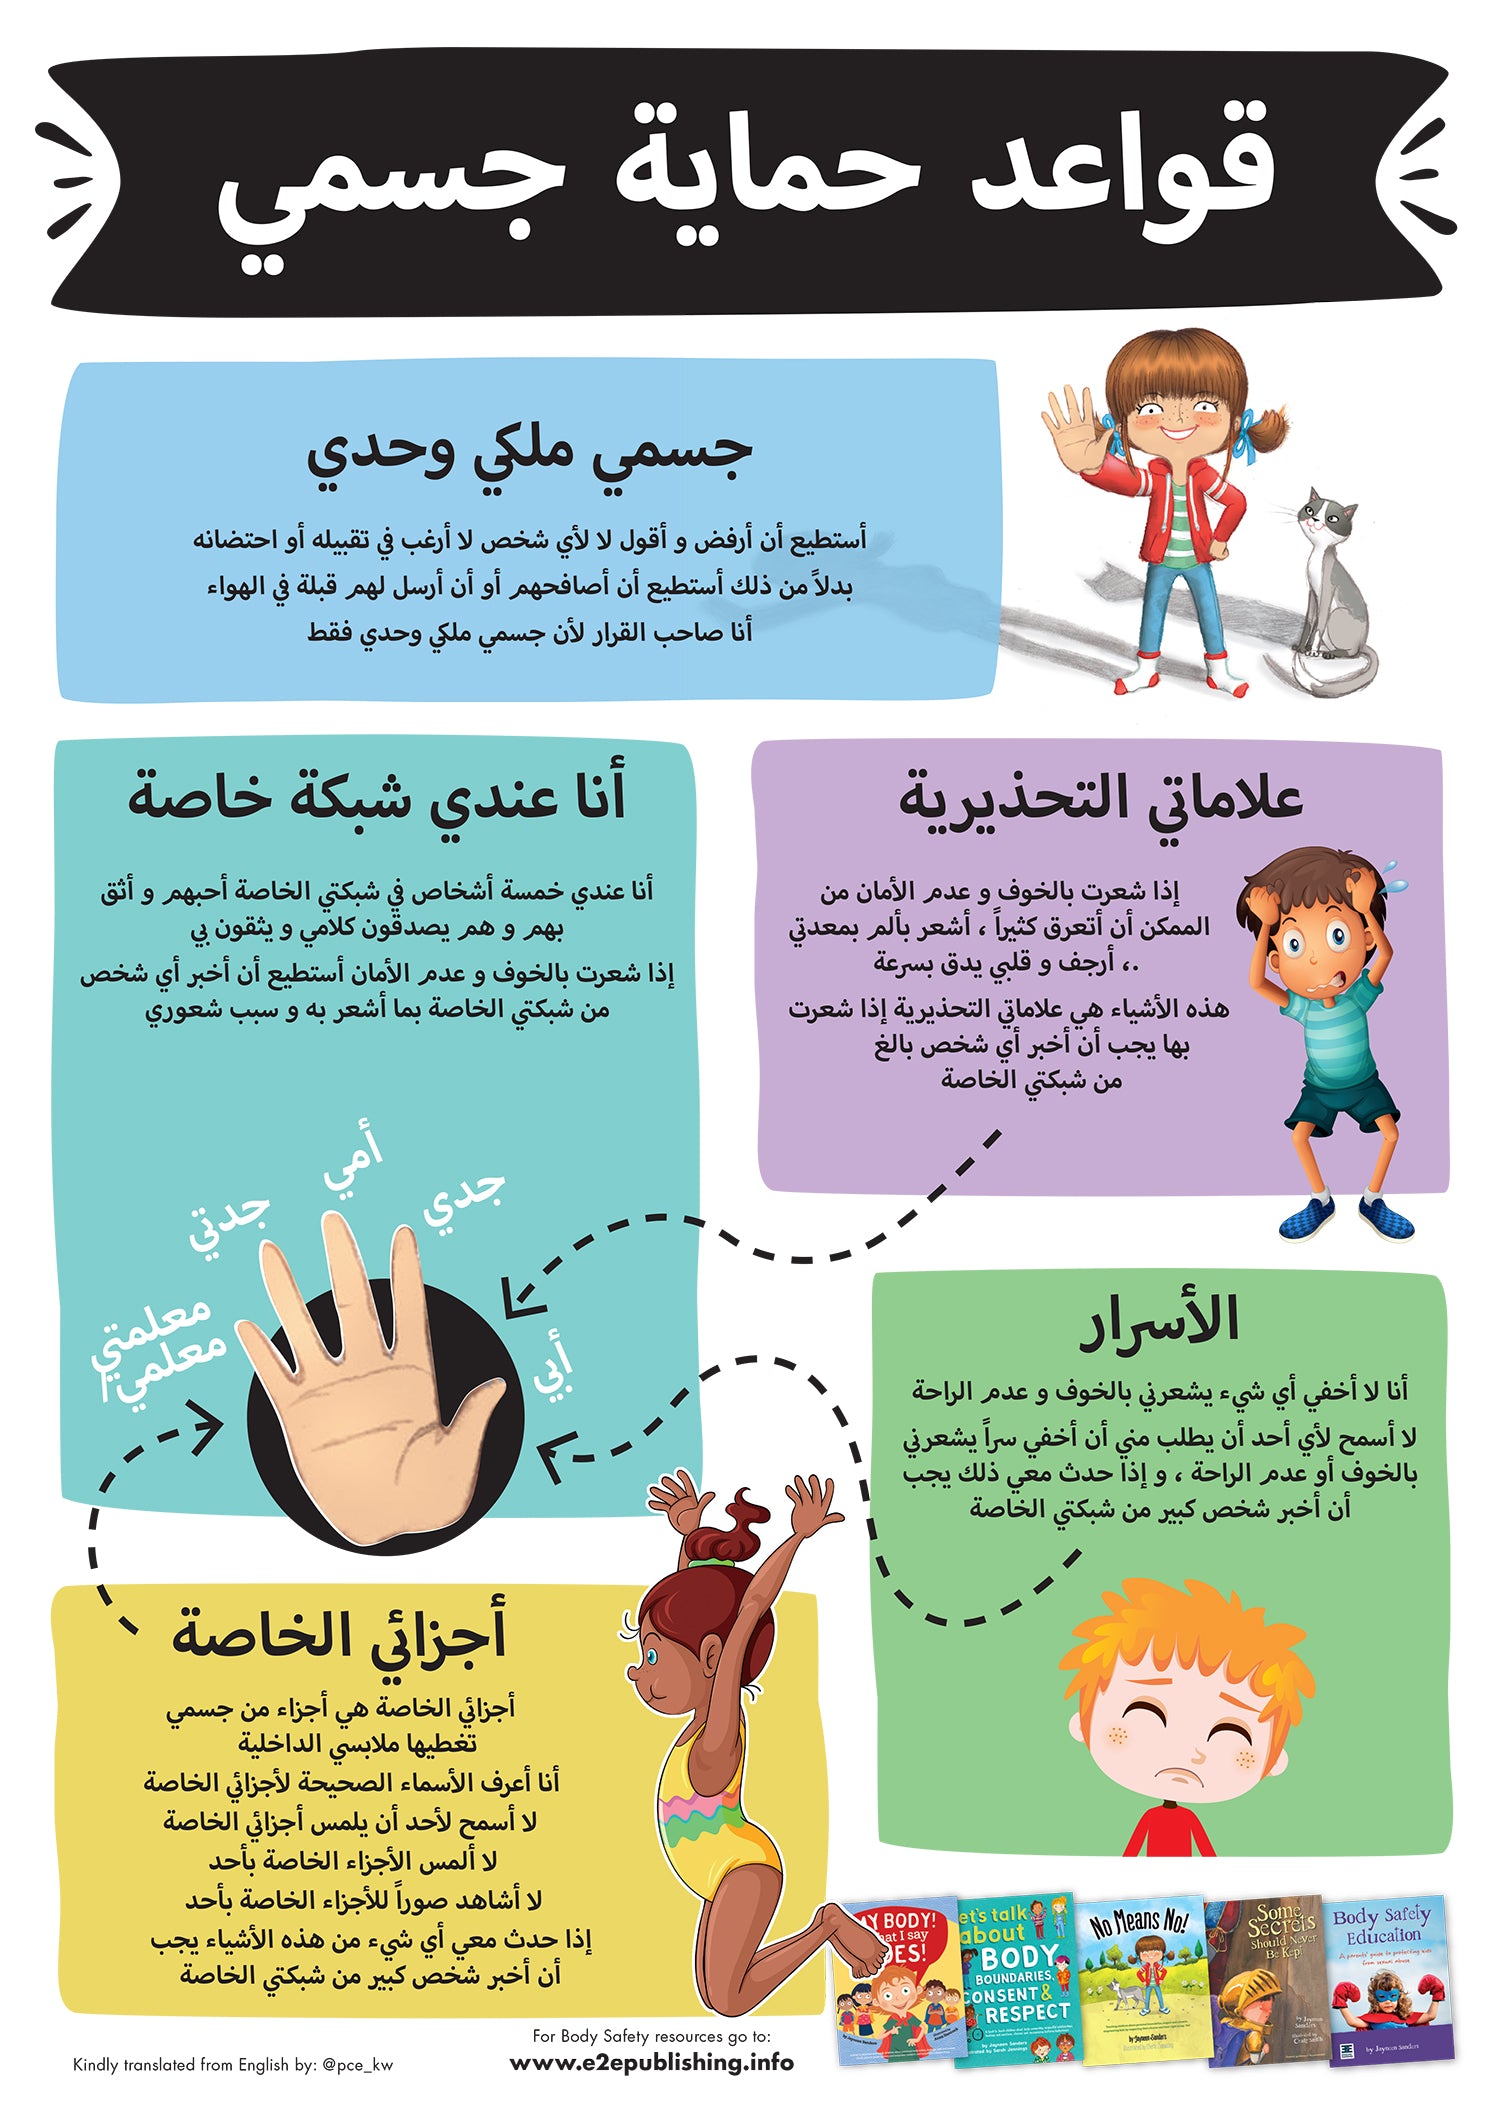 Body Safety Rules poster for children, written in Arabic.